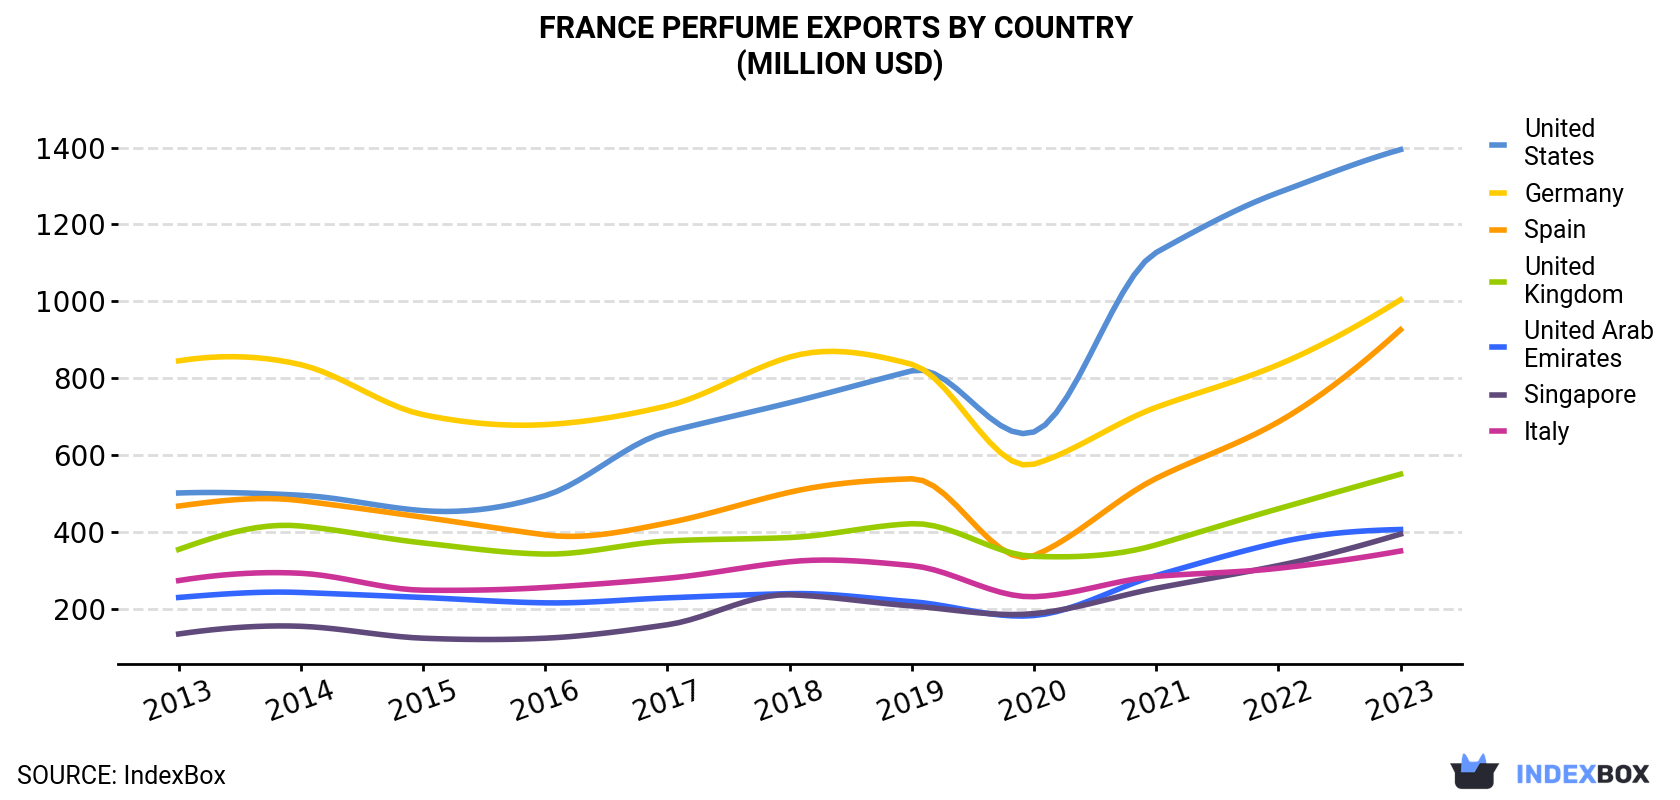 France Perfume Exports By Country (Million USD)